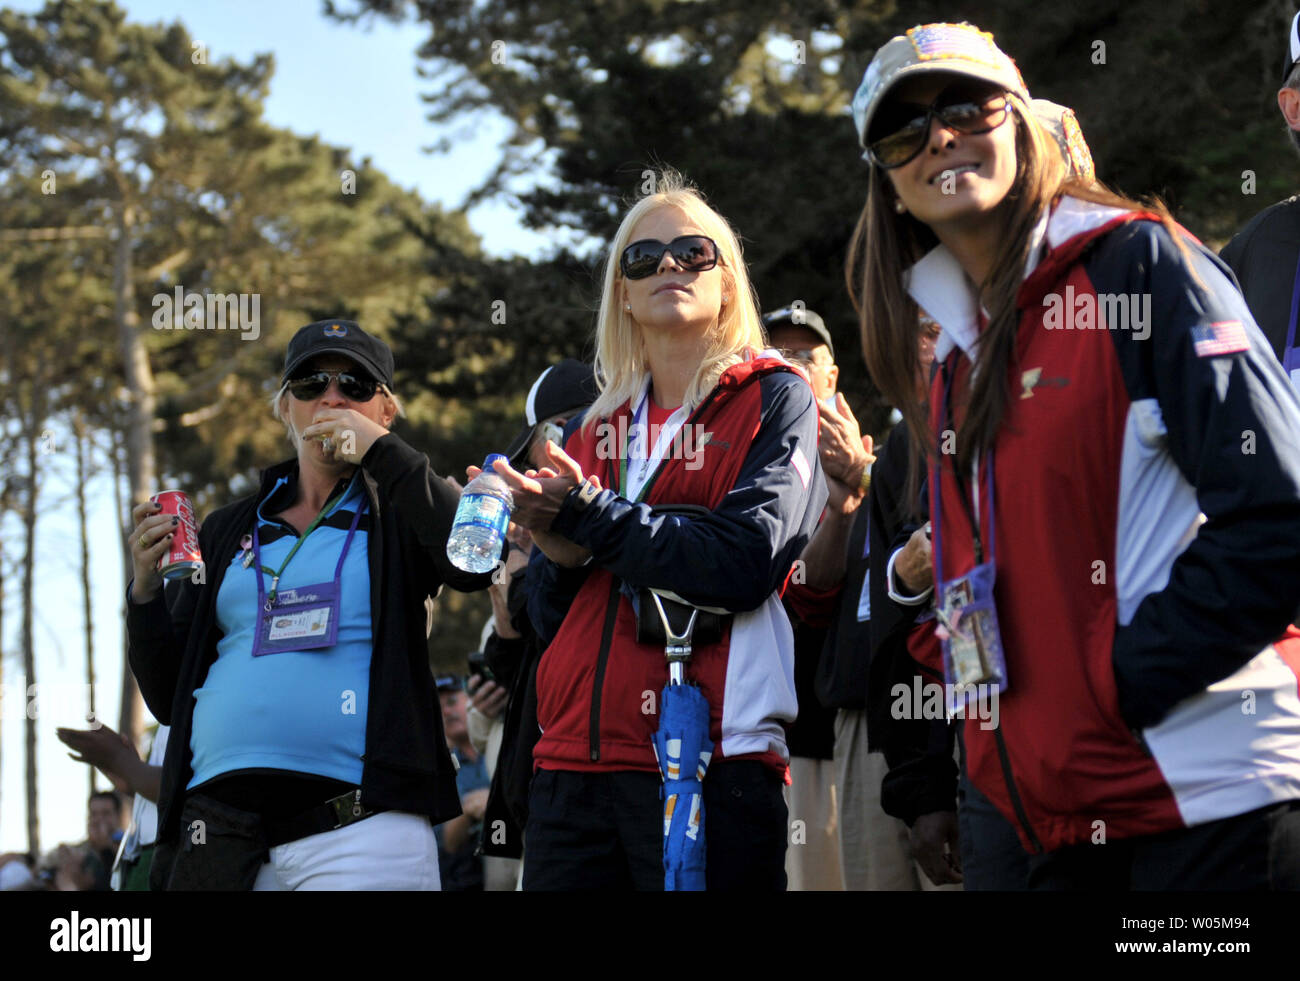 Elin Nordegren, the wife of United States team member Tiger Woods, watches gold action with the wives of other players during the second round of The Presidents Cup at Harding Park Golf Course in San Francisco, California on October 9, 2009.    UPI/Kevin Dietsch Stock Photo